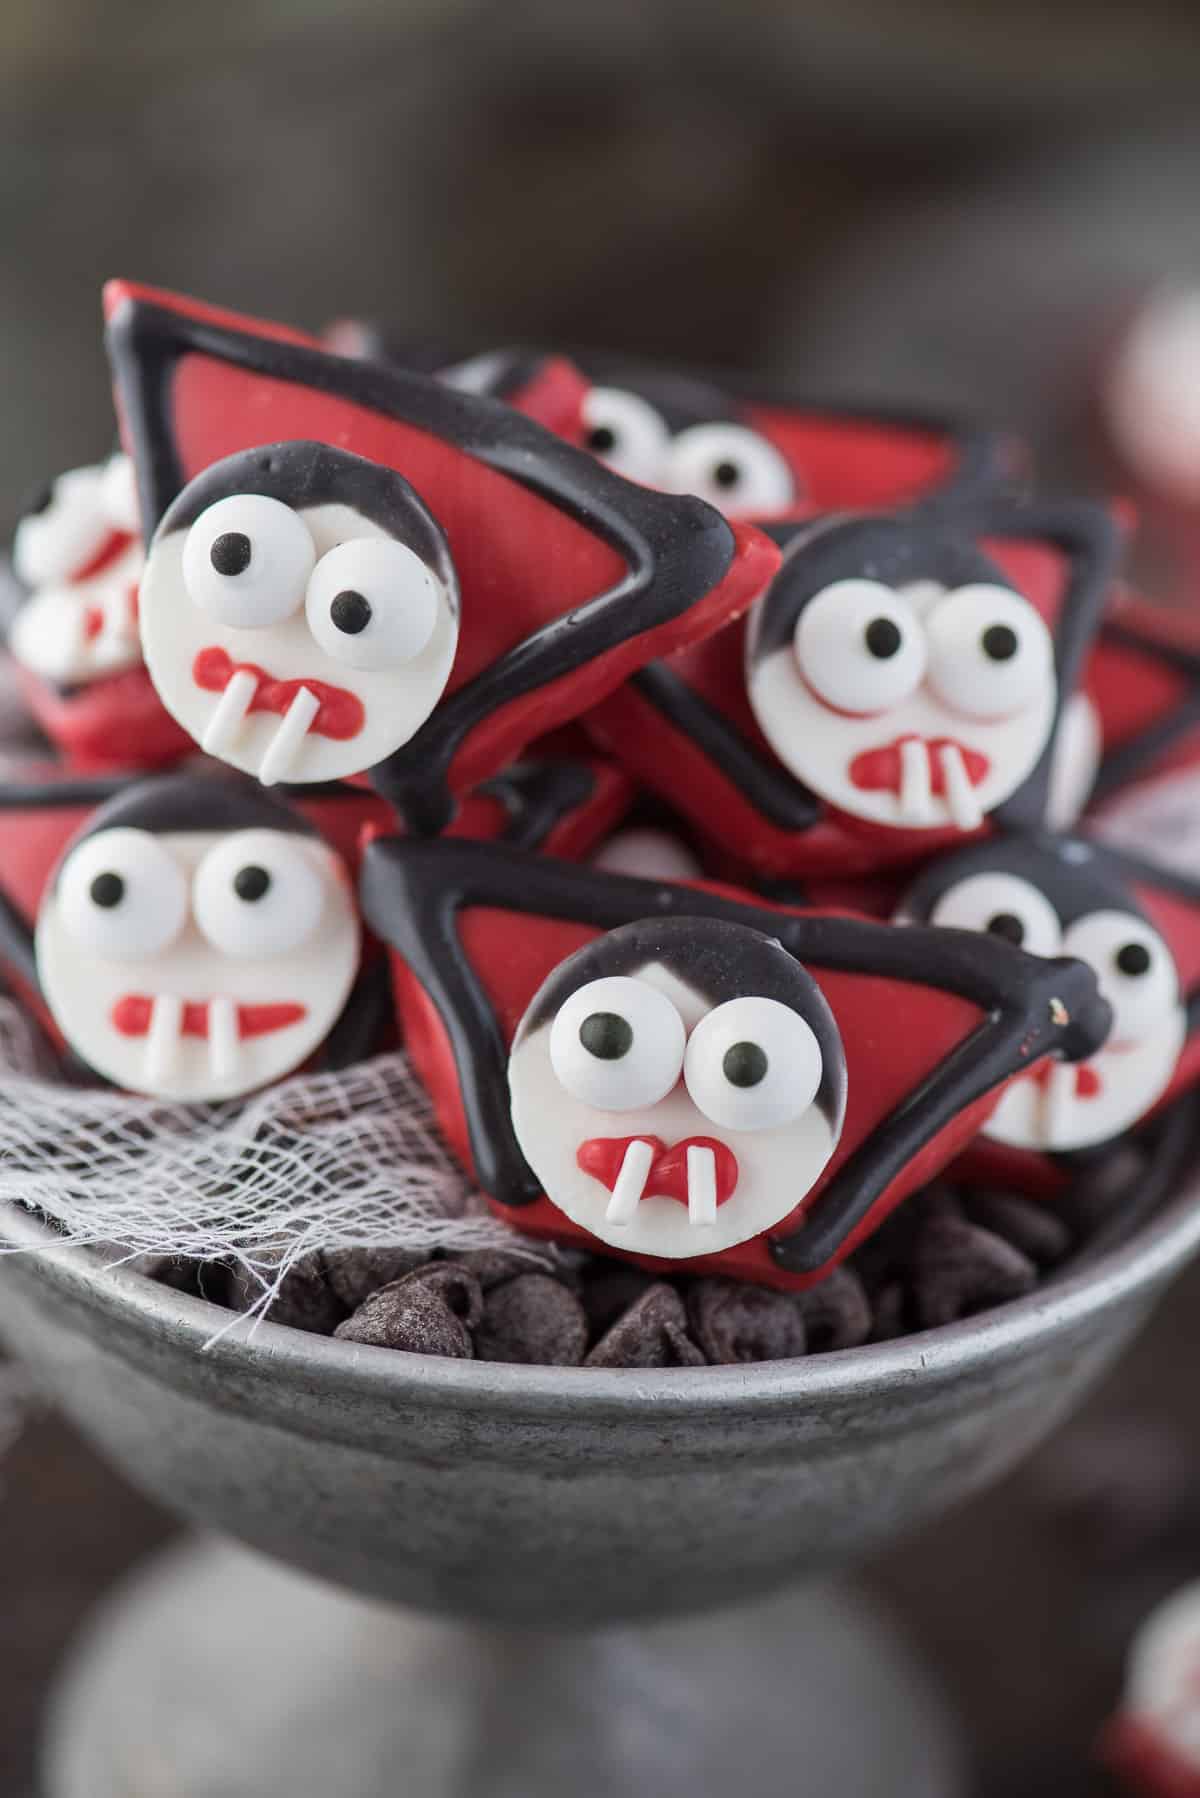 edible vampire treats made out of graham crackers and candy melts displayed in metal bowl